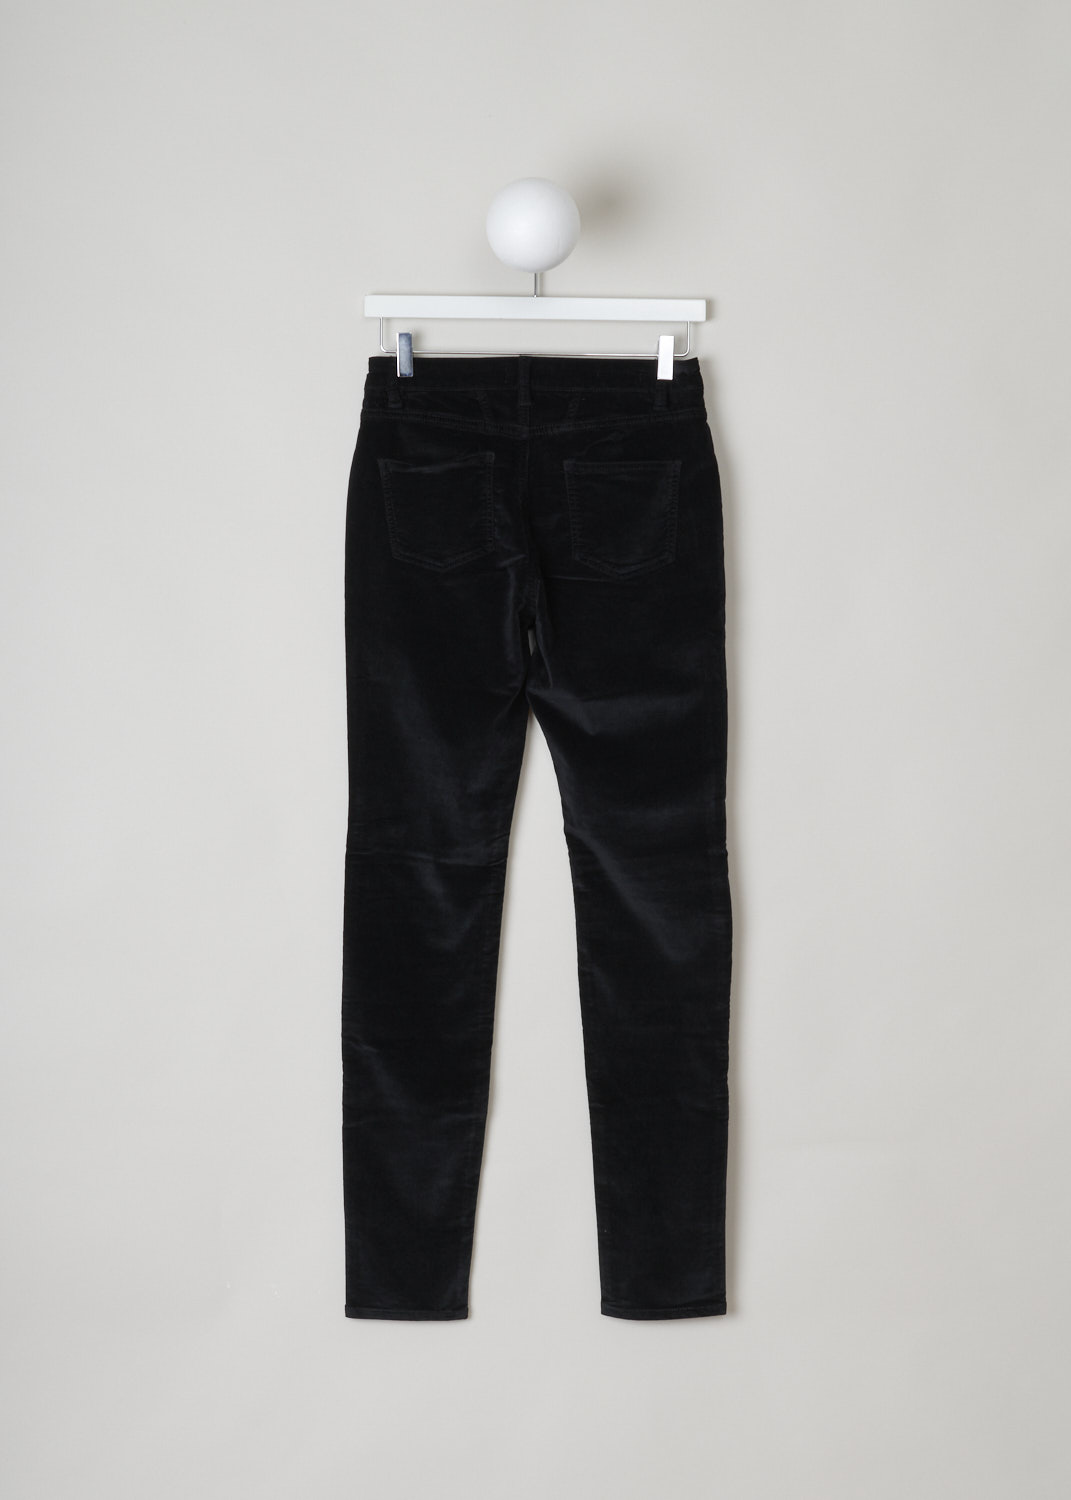 Closed, Black velvet lizzy jeans, lizzy_C91099_38C_30_100, black, back, Black velvet pants comes in a 5-pocket model, with a high-waist and tapered fit throughout the legs. The cotton blend used on this model is know for its high elasticity and comfort.